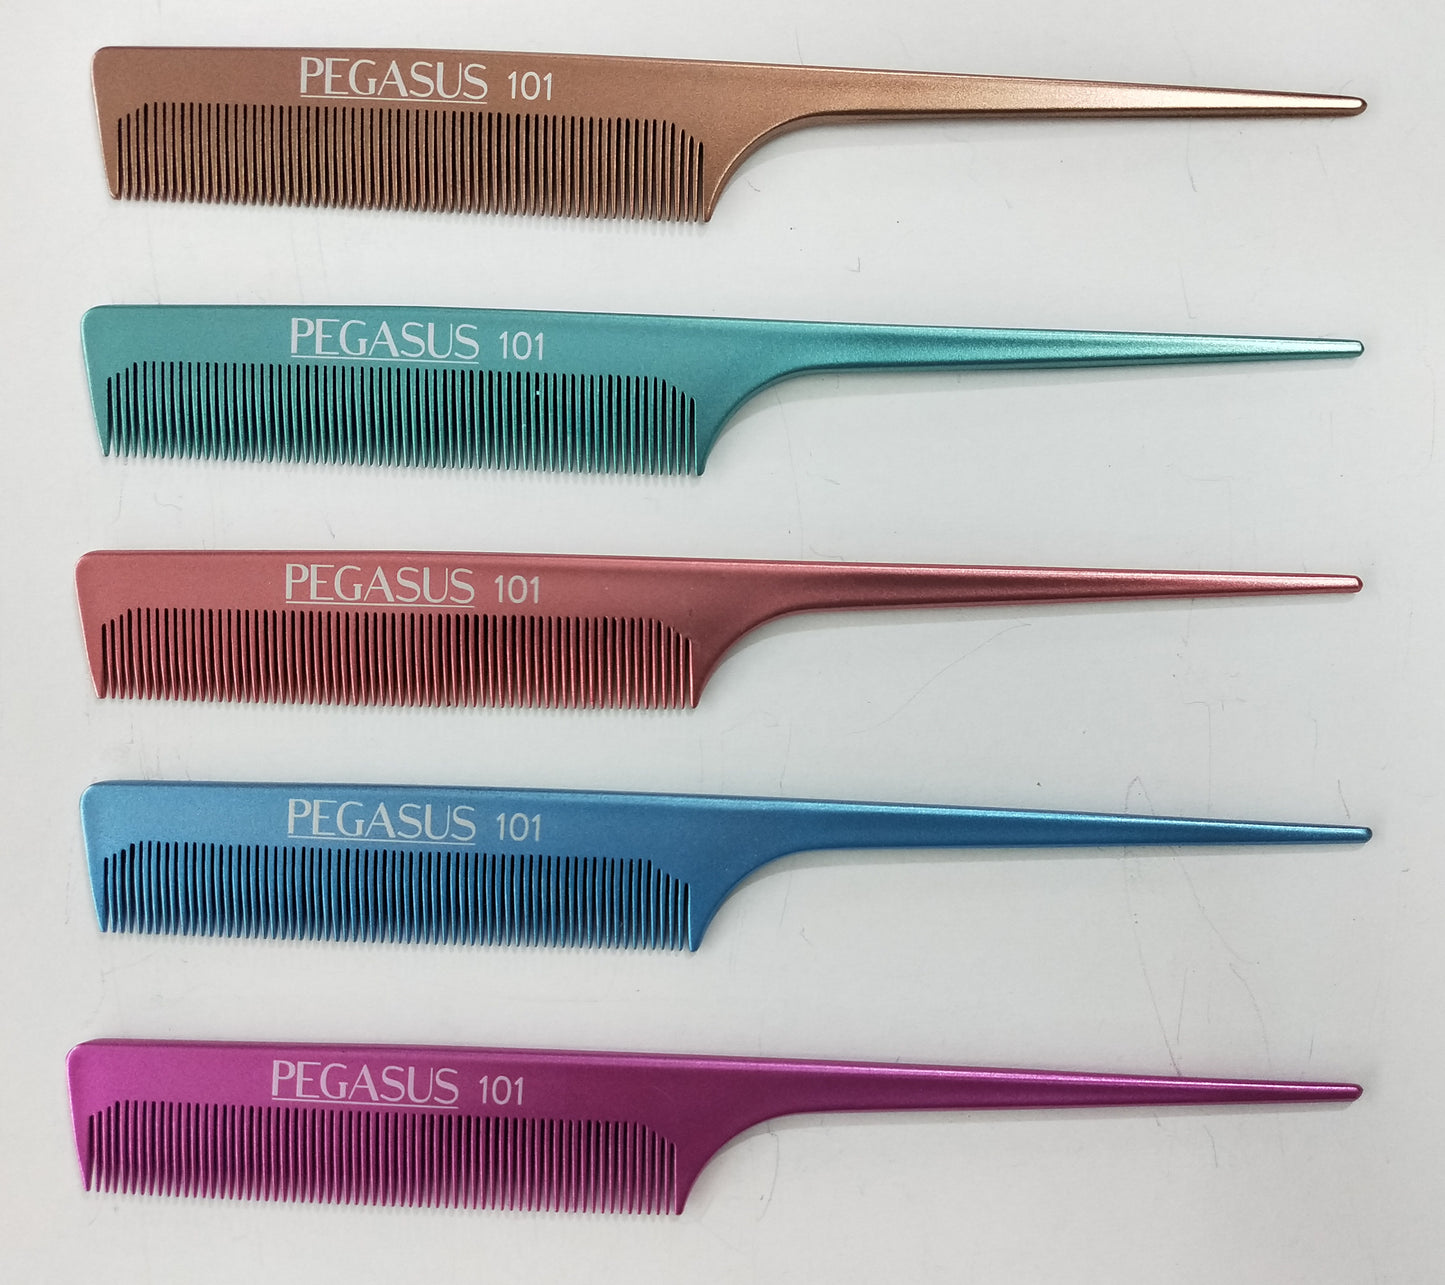 Pegasus MICOLOR 101, 8in Hard Rubber Fine Tooth Rat Tail Comb, Handmade, Seamless, Smooth Edges, Anti Static, Heat and Chemically Resistant, Great for Parting, Coloring Hair | Peines de goma dura - Gold